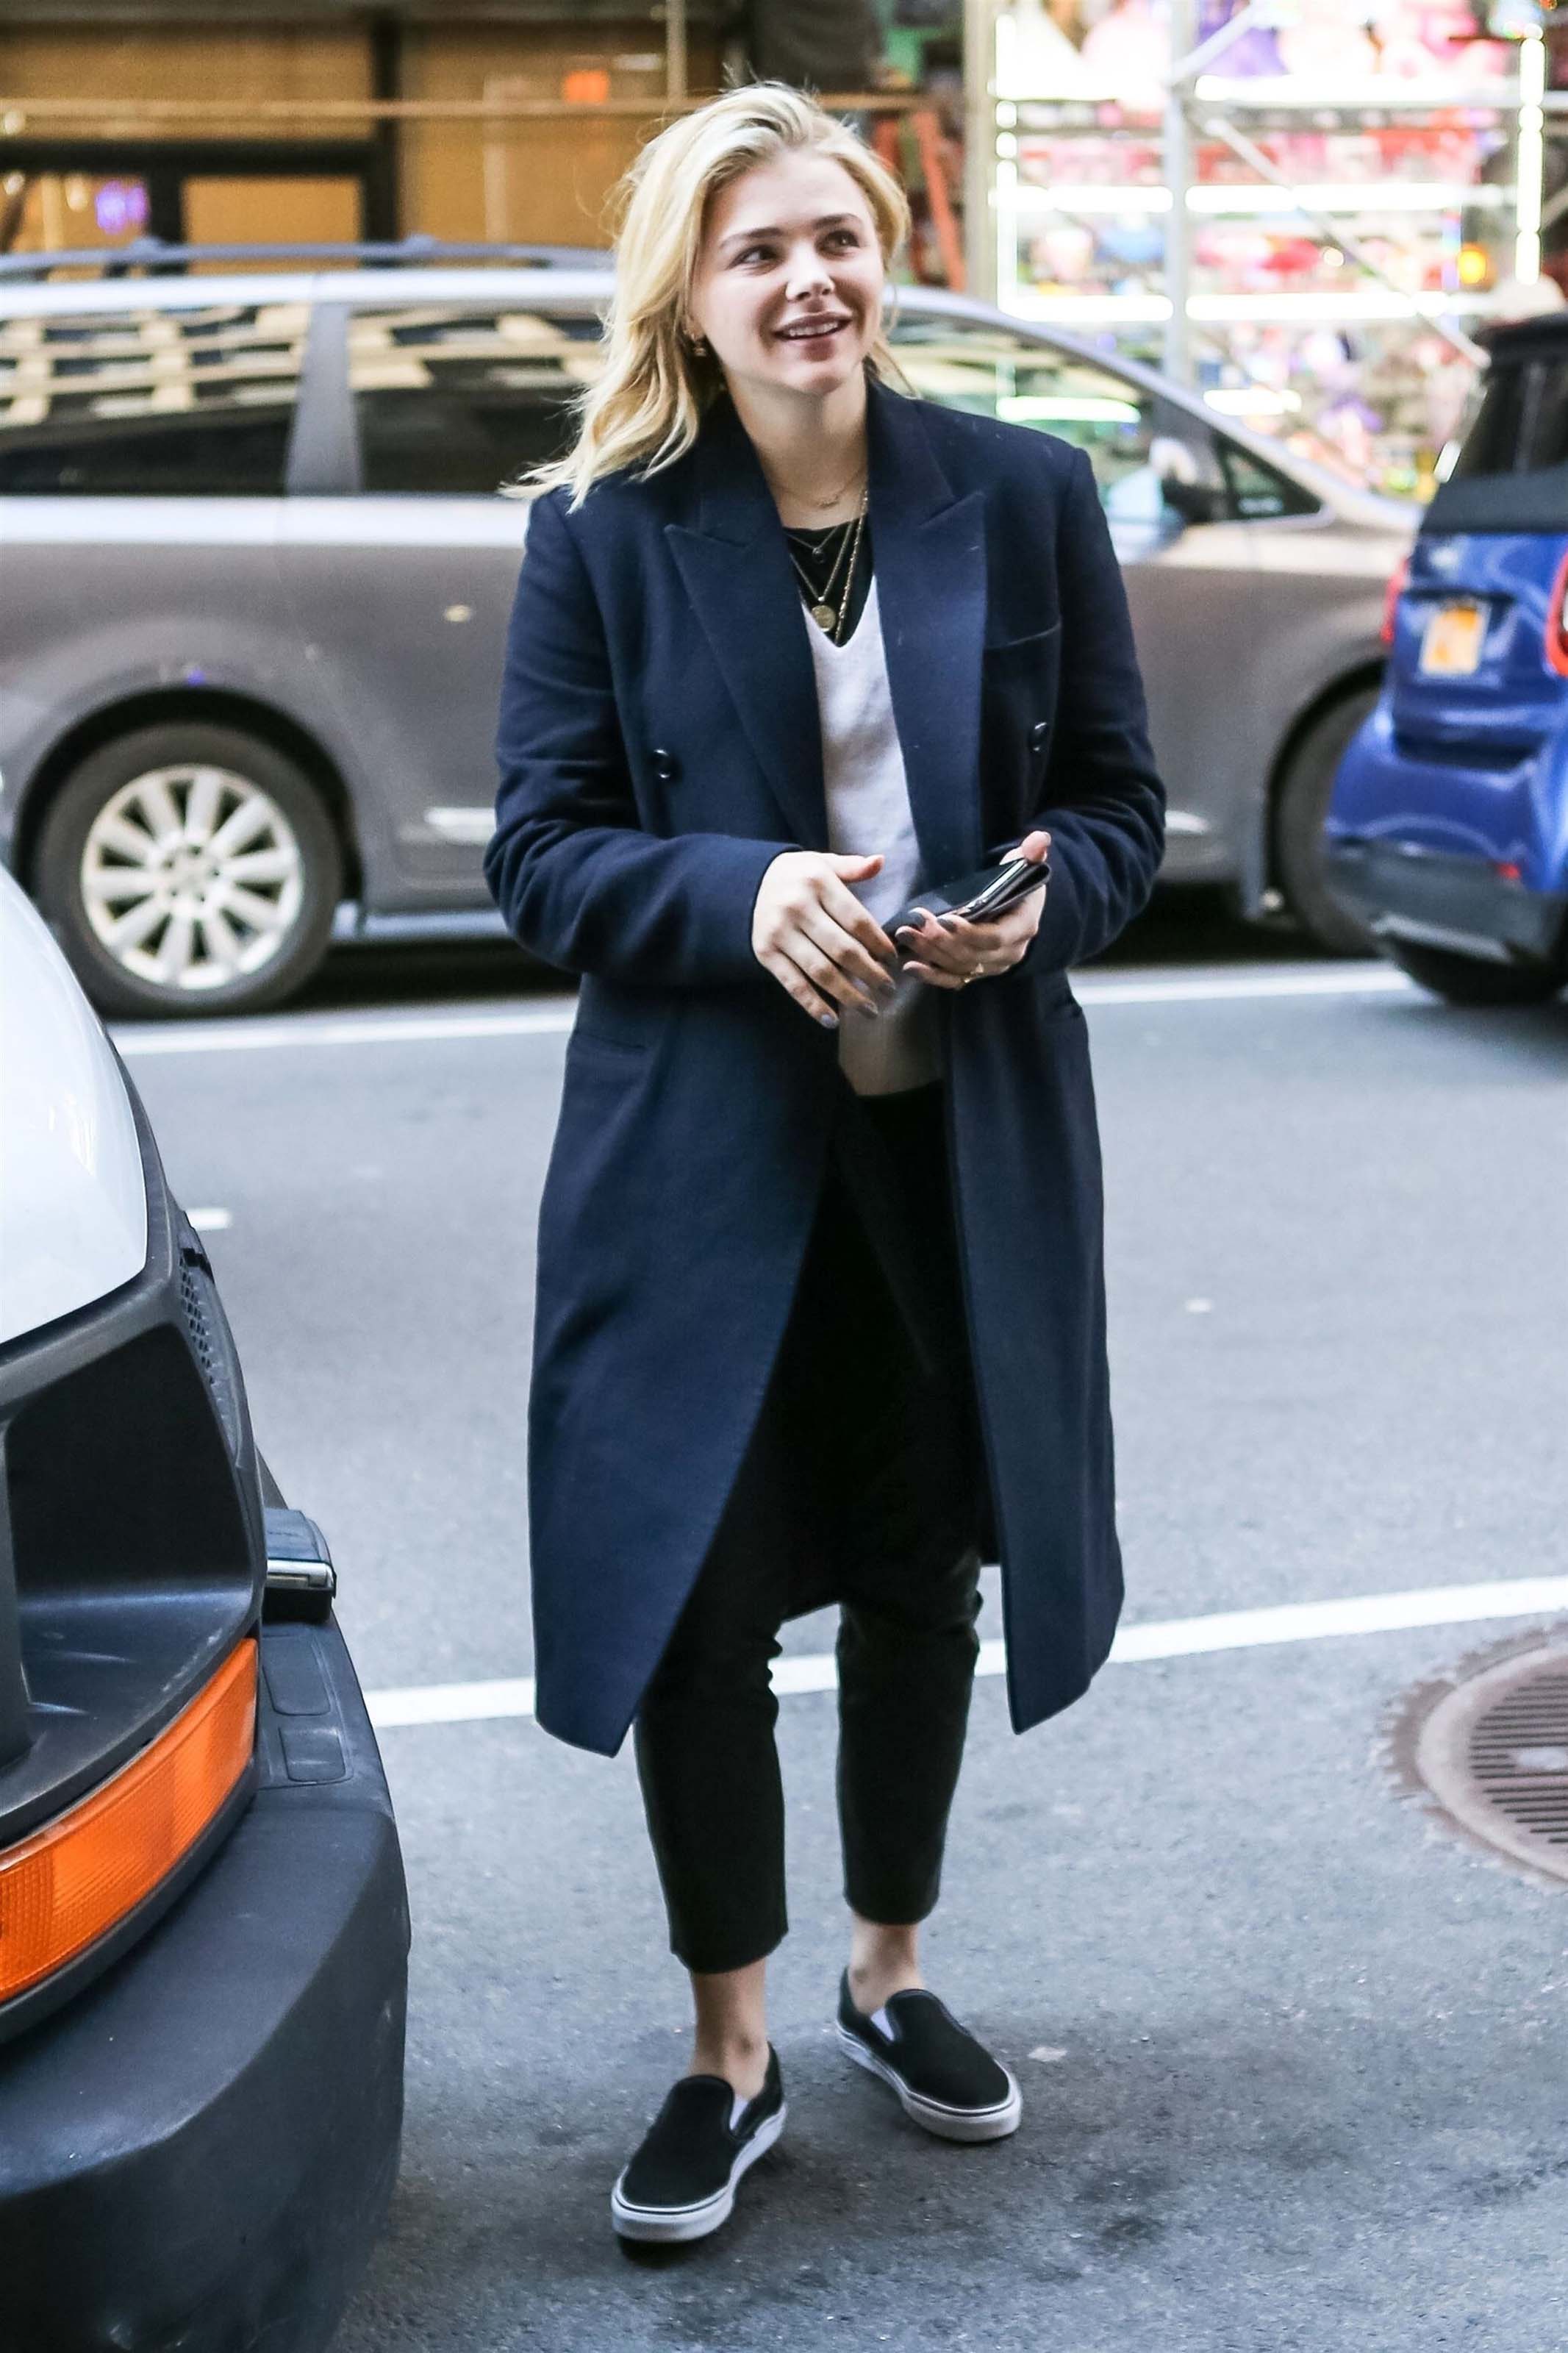 Chloe Moretz out in NYC